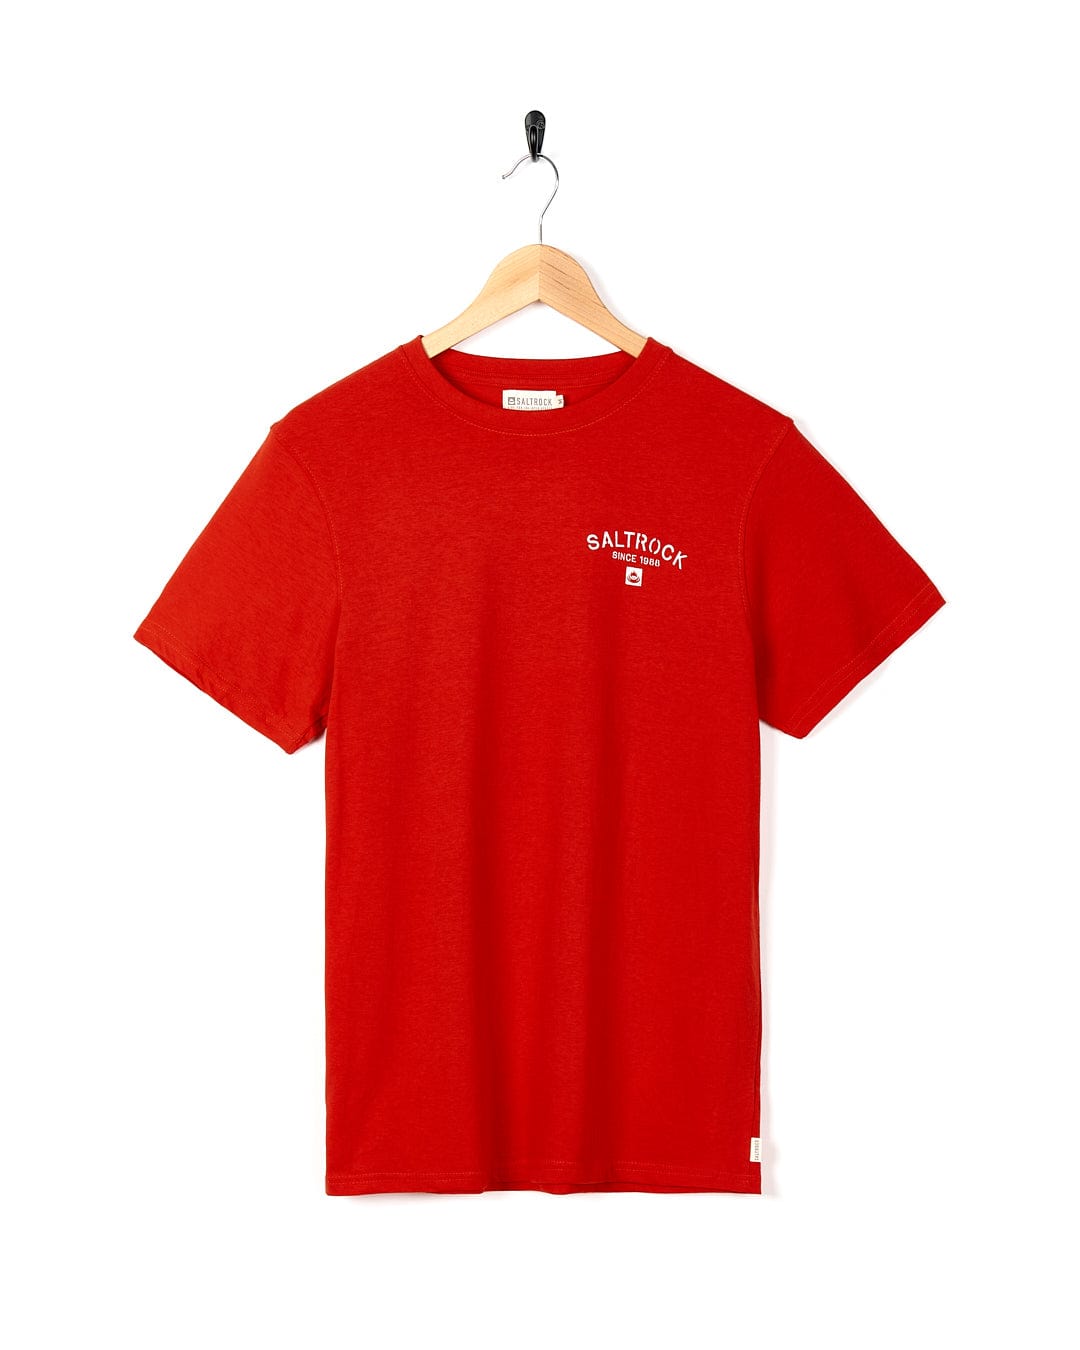 A Saltrock Stencil - Mens Location T-Shirt - Croyde - Red with a white logo on it.